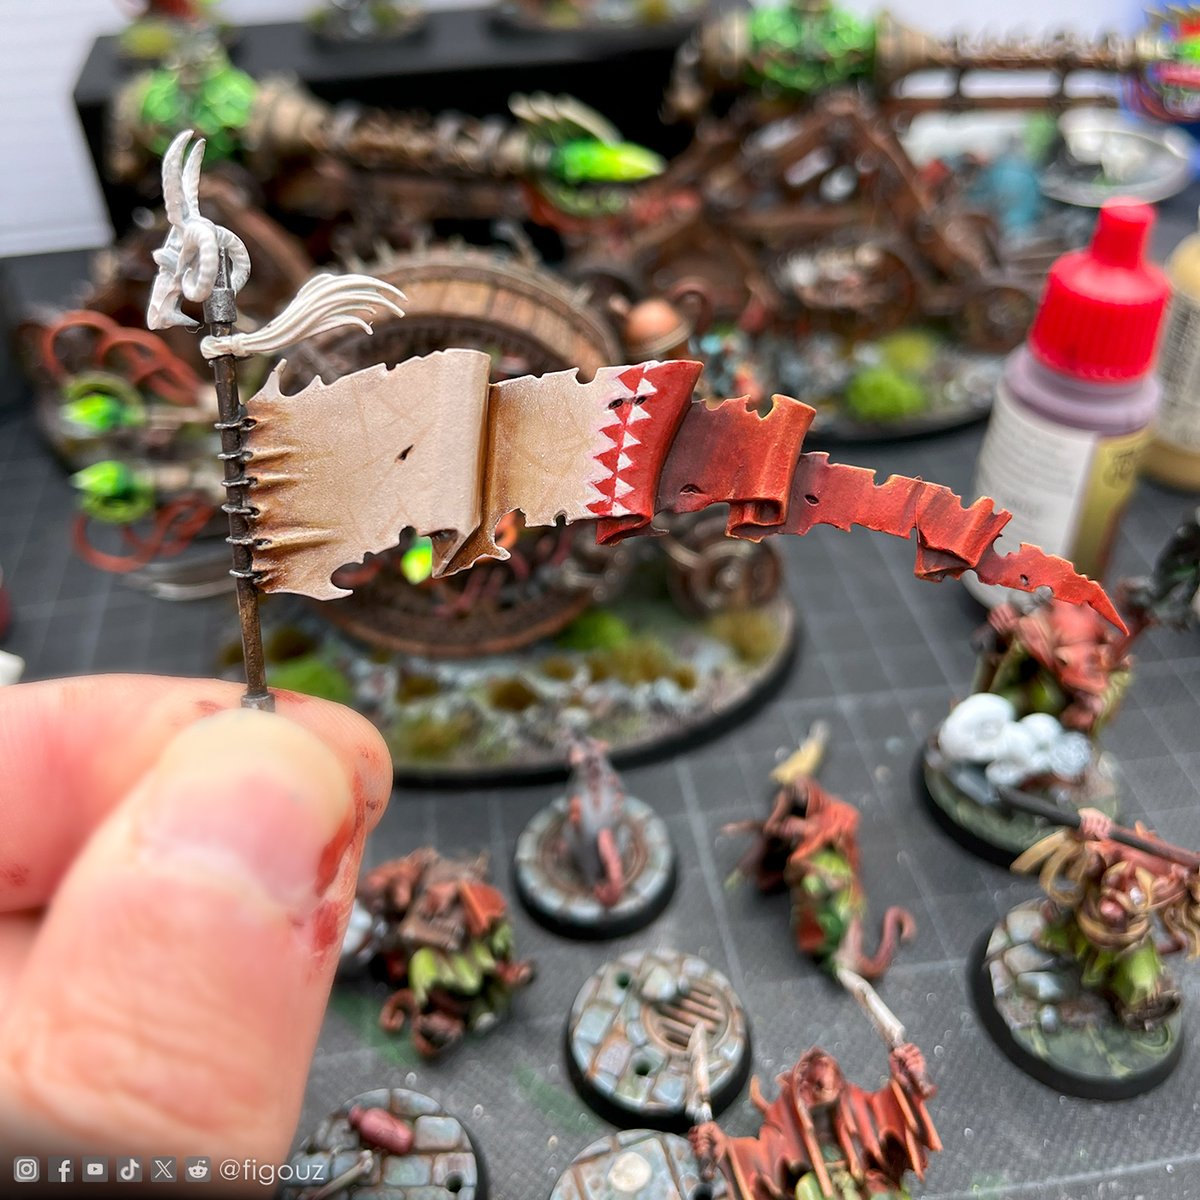 It's time to get back to the brushes and finish this Doomwheel! So I've started painting her long banner, but I'm apprehensive about freehands, I'm terrible at them.
#warhammer #WarhammerCommunity #skaven #doomwheel #ageofsigmar #theoldworld #paintingminiatures #AOS
@warhammer